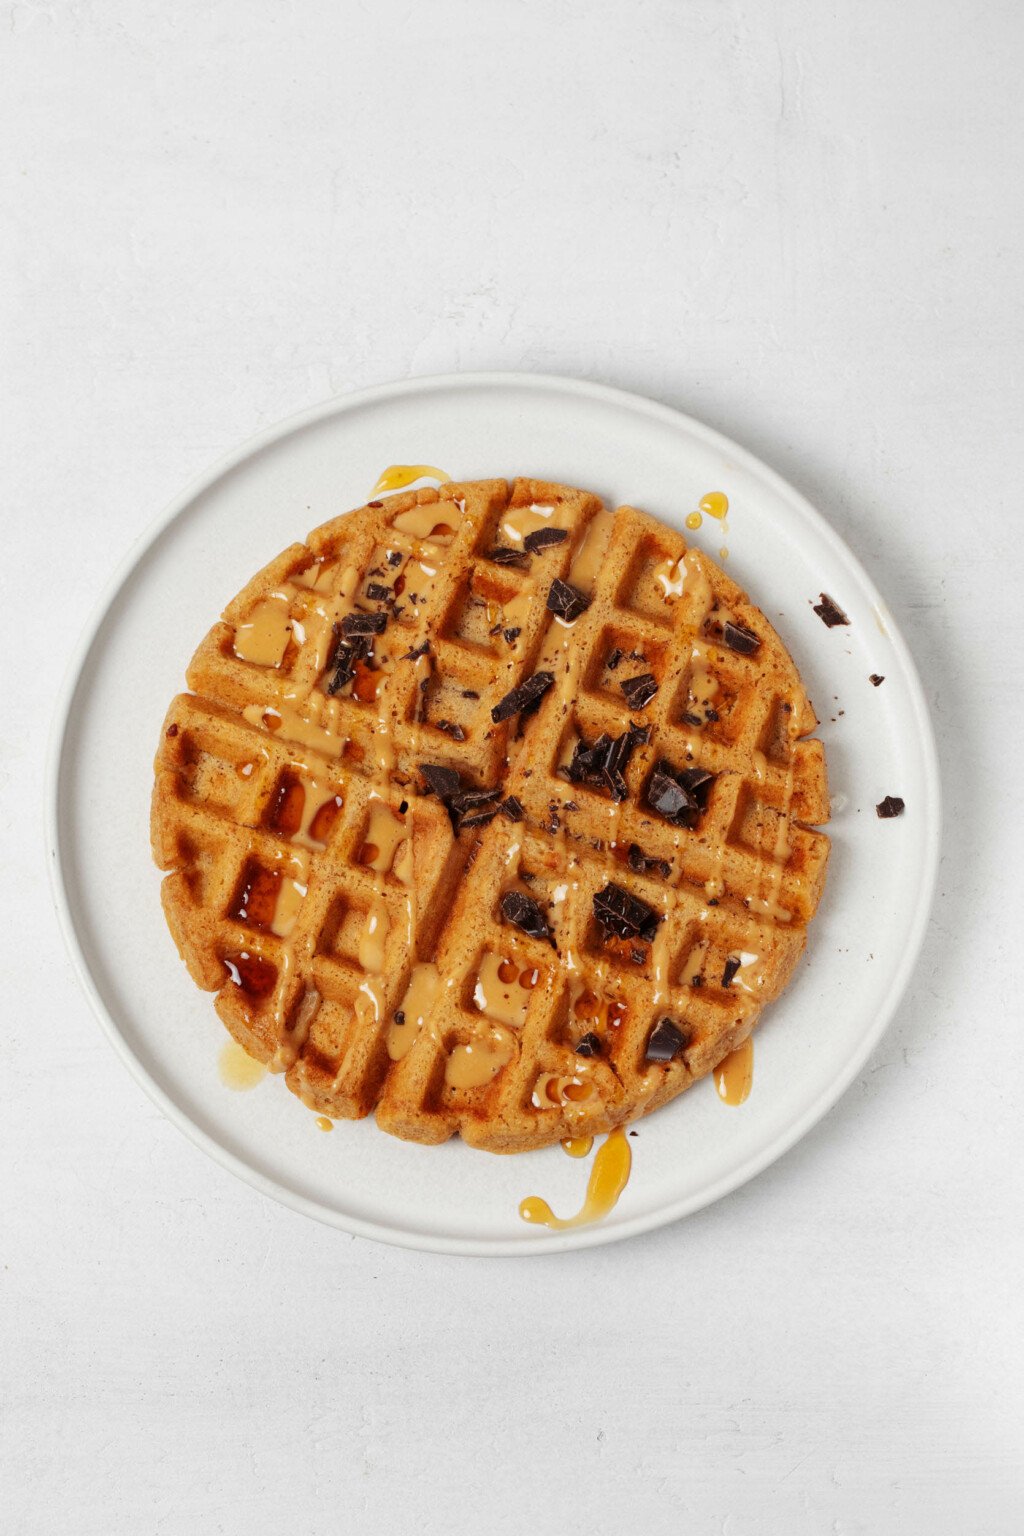 An overhead image of a round, white plate, which is holding a light and crispy vegan peanut butter waffle. The waffle is topped with chopped dark chocolate and a drizzle of peanut butter.